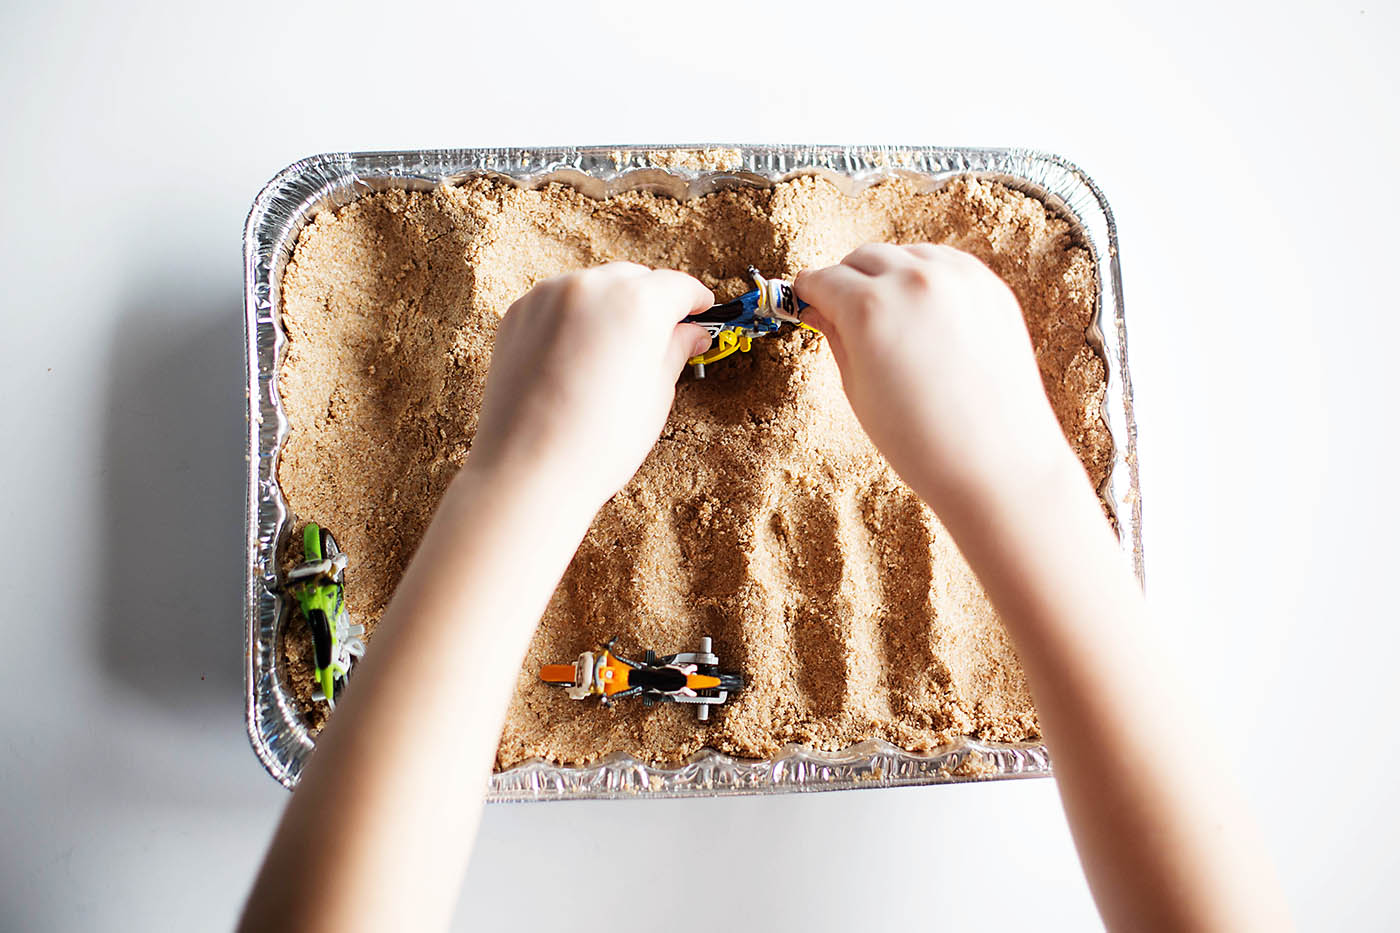 DIY sand for a toy motocross track - fun indoor play idea!